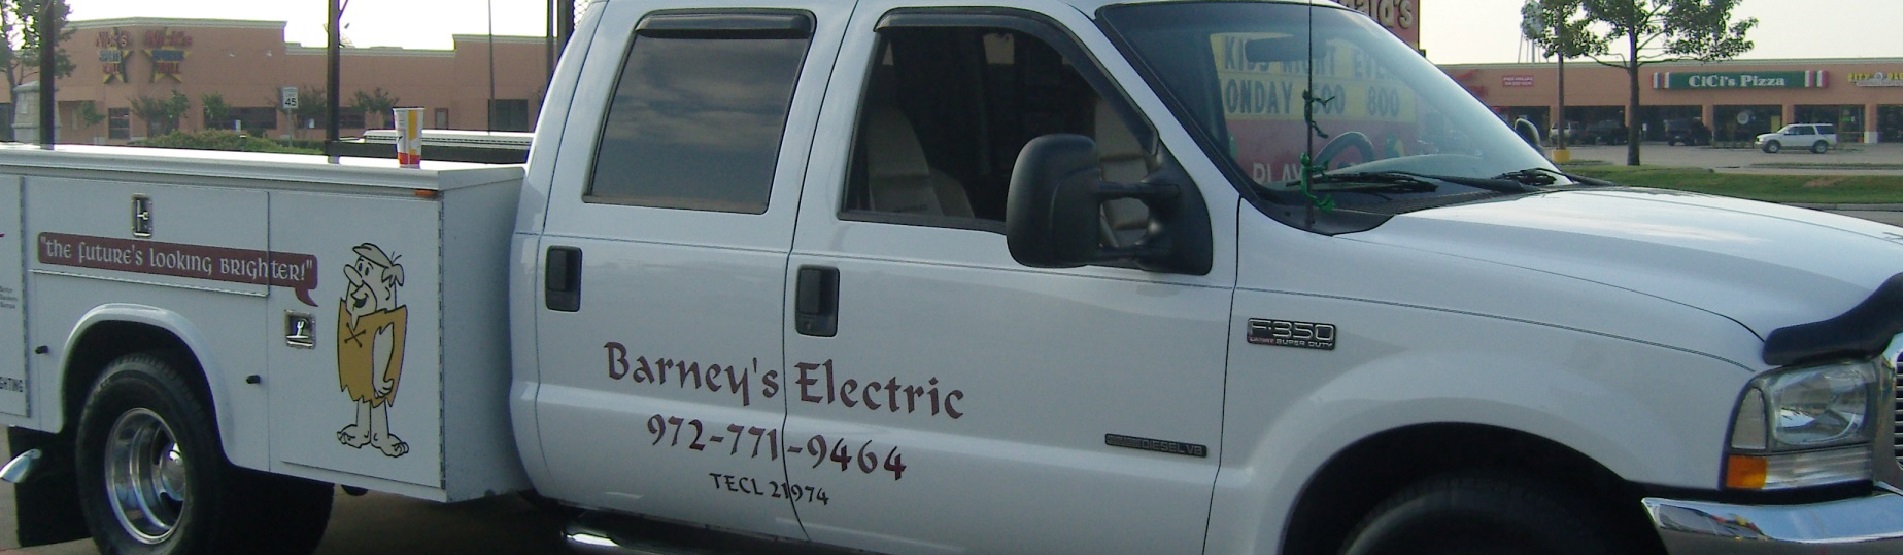 Electrician Nevada TX Barney's Electric Full Service Electrician Residential Commercial Retail and New Construction Wiring Repair Installation Service 24 Hour Emergency Services Master Electrician Rockwall Texas